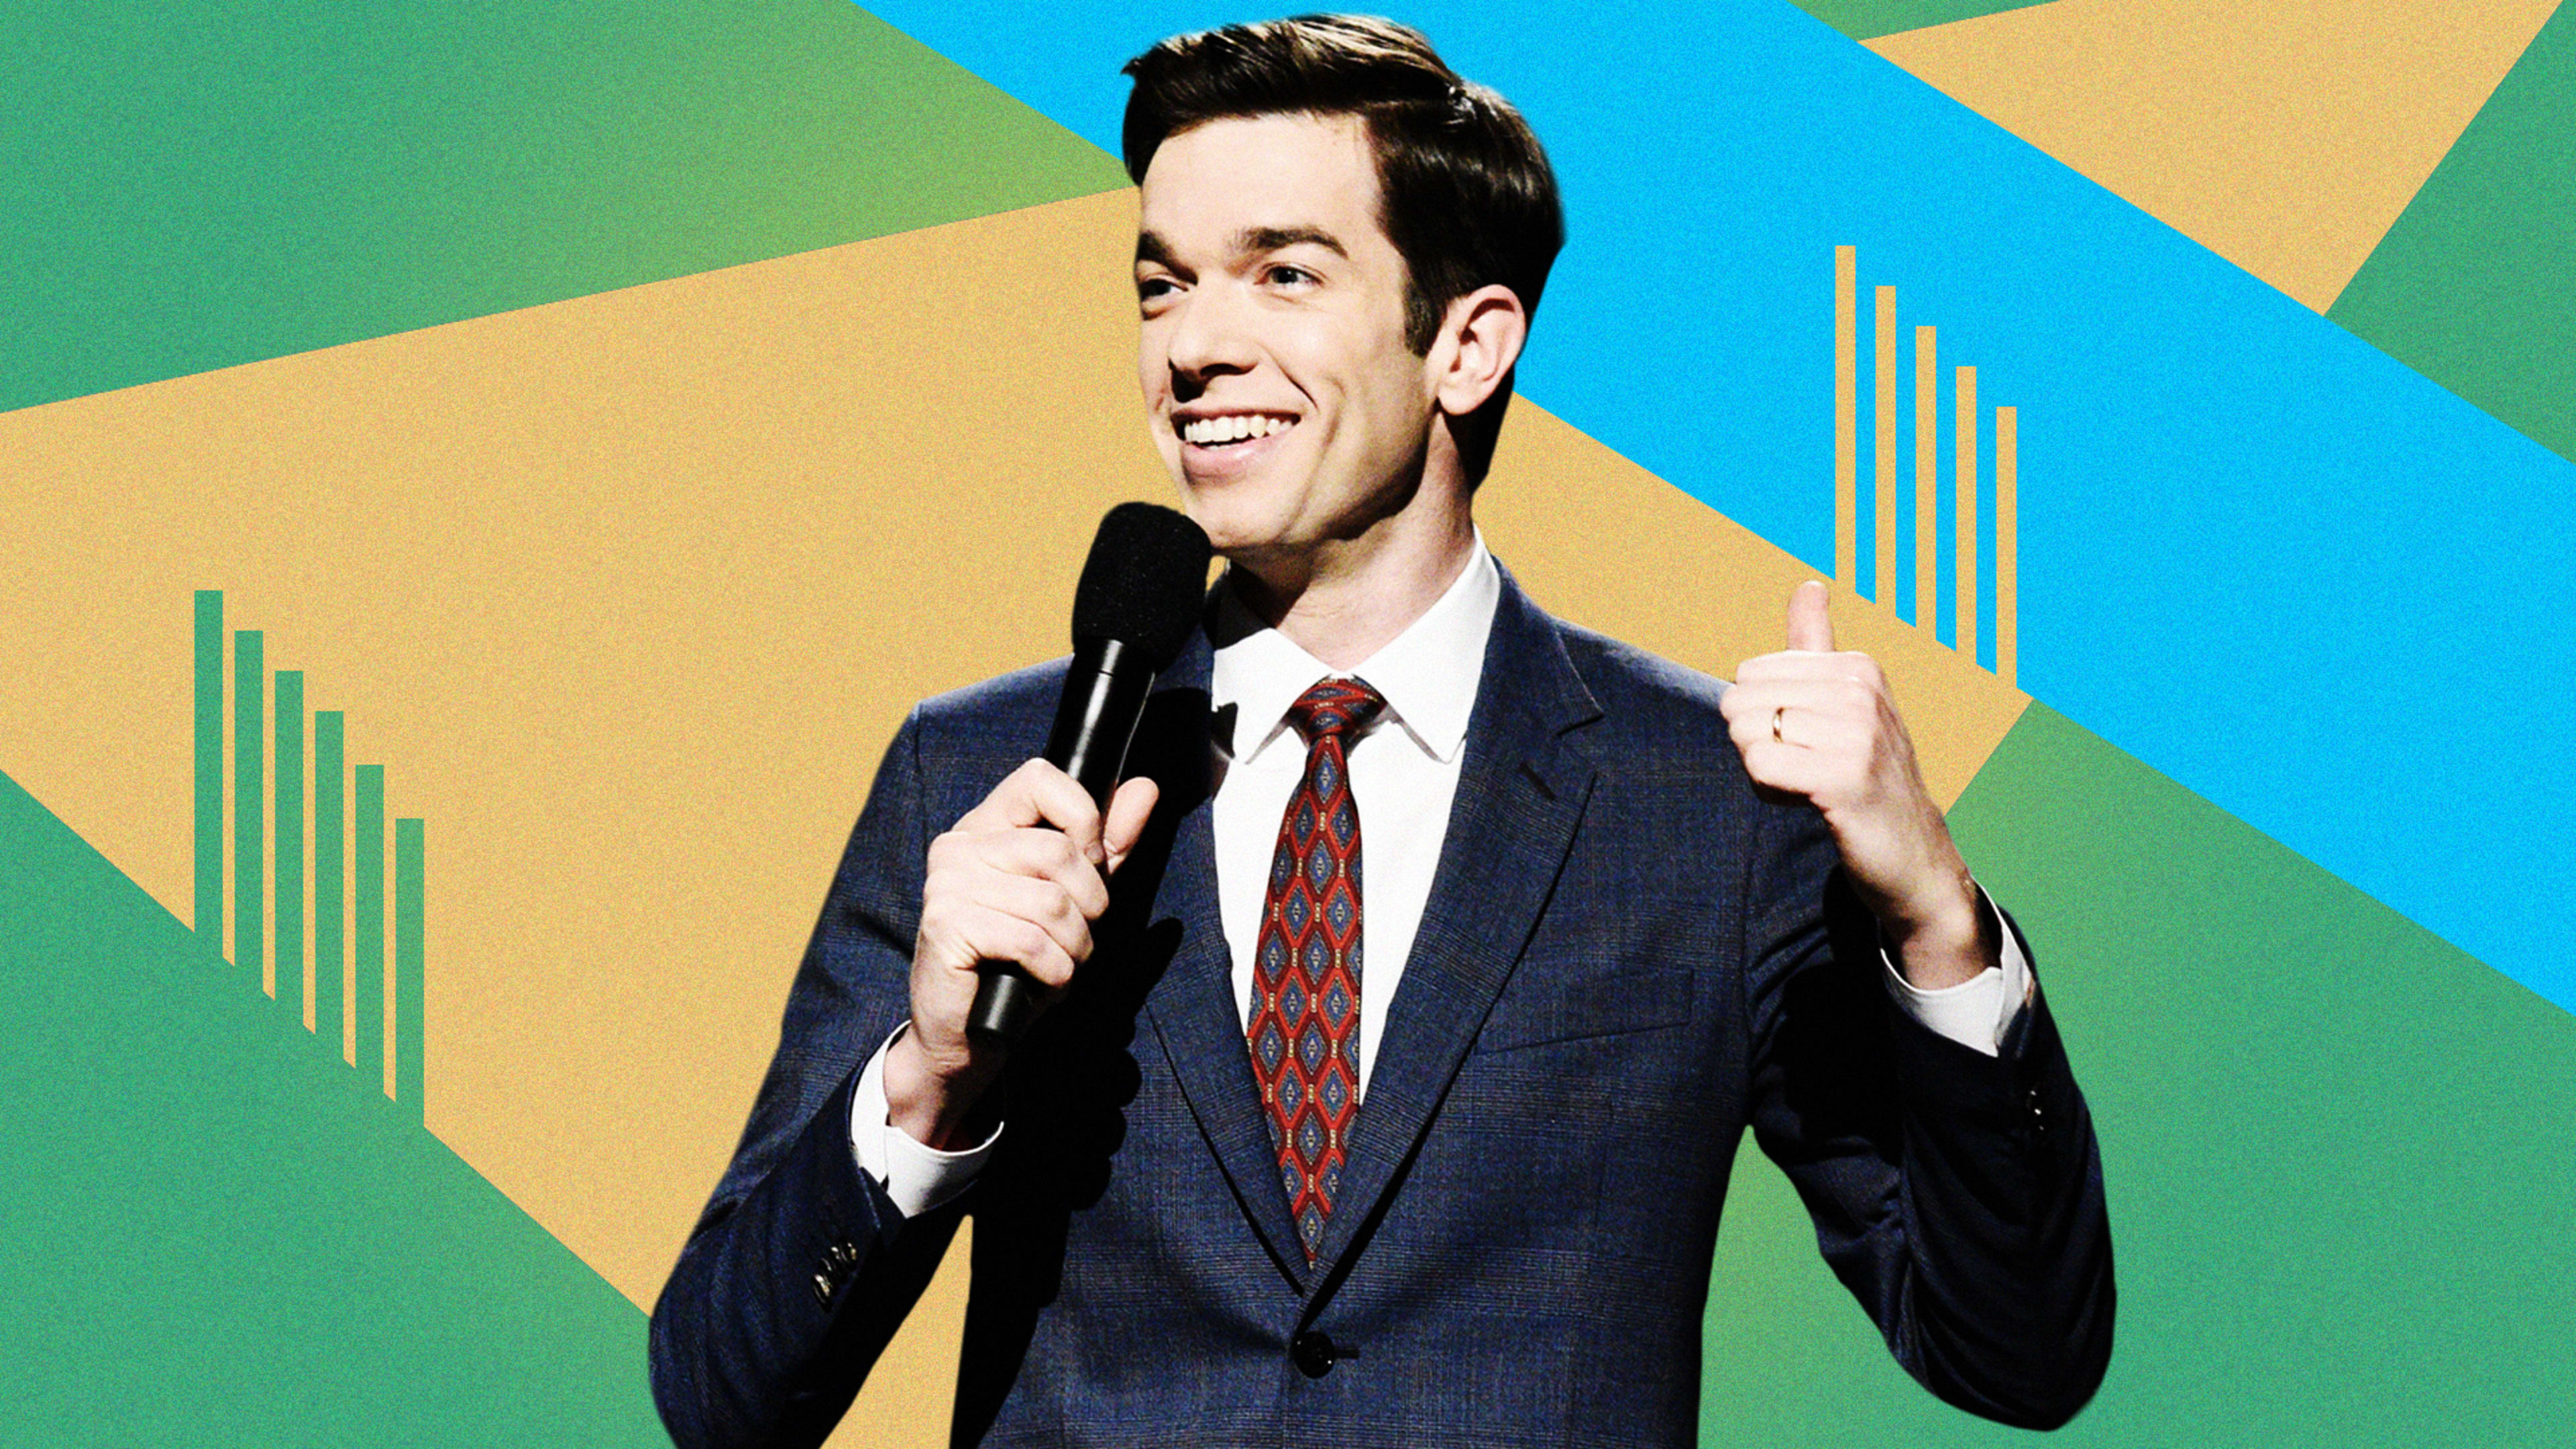 A pitch for ‘SNL’: Make John Mulaney the permanent host